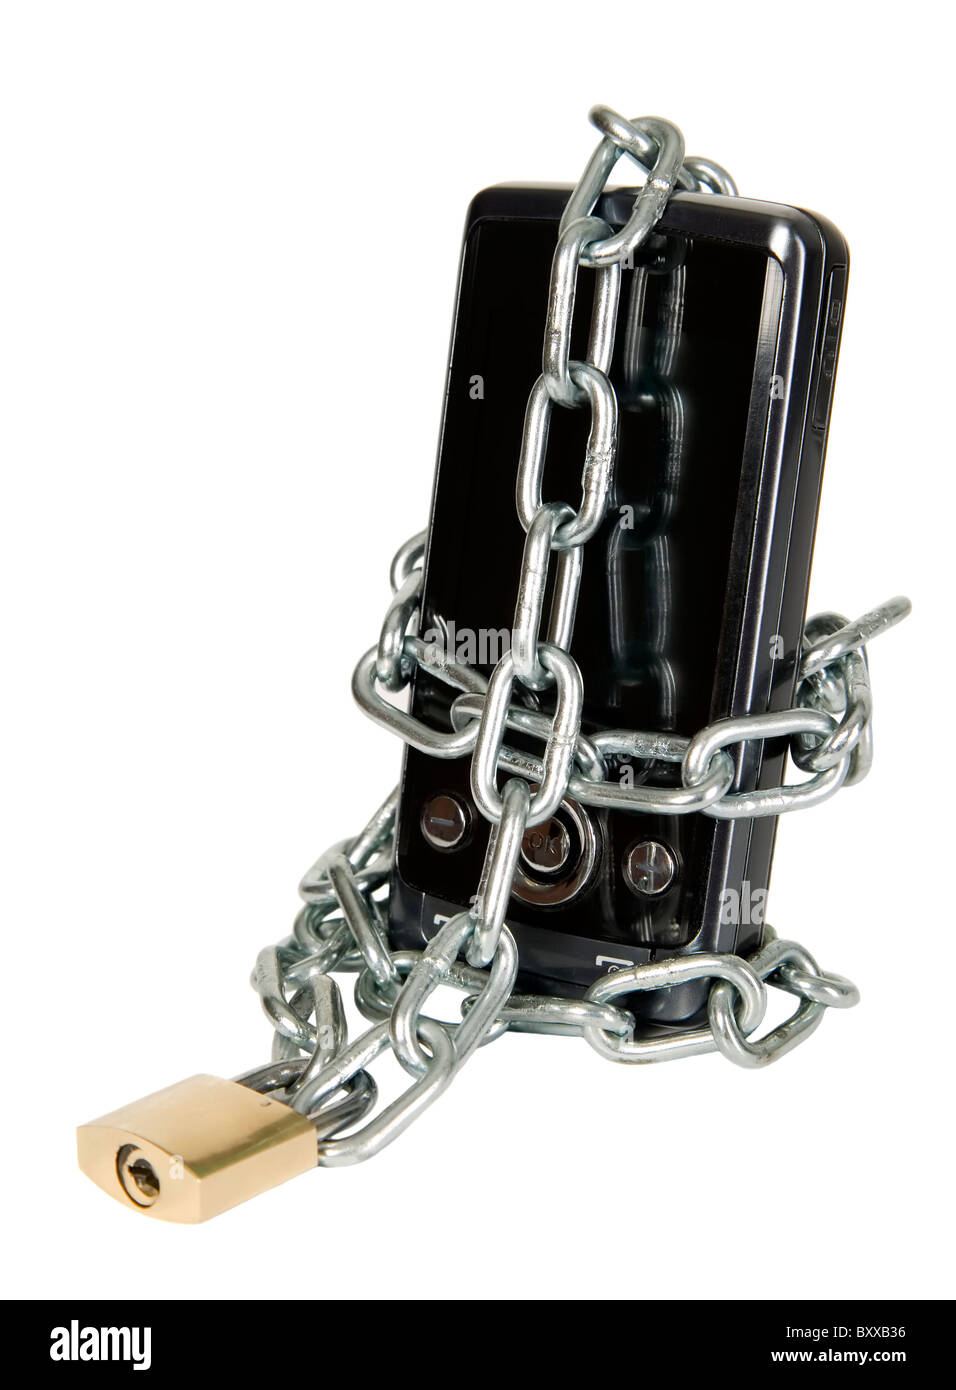 Mobile phone is secured with metal chain and lock Stock Photo